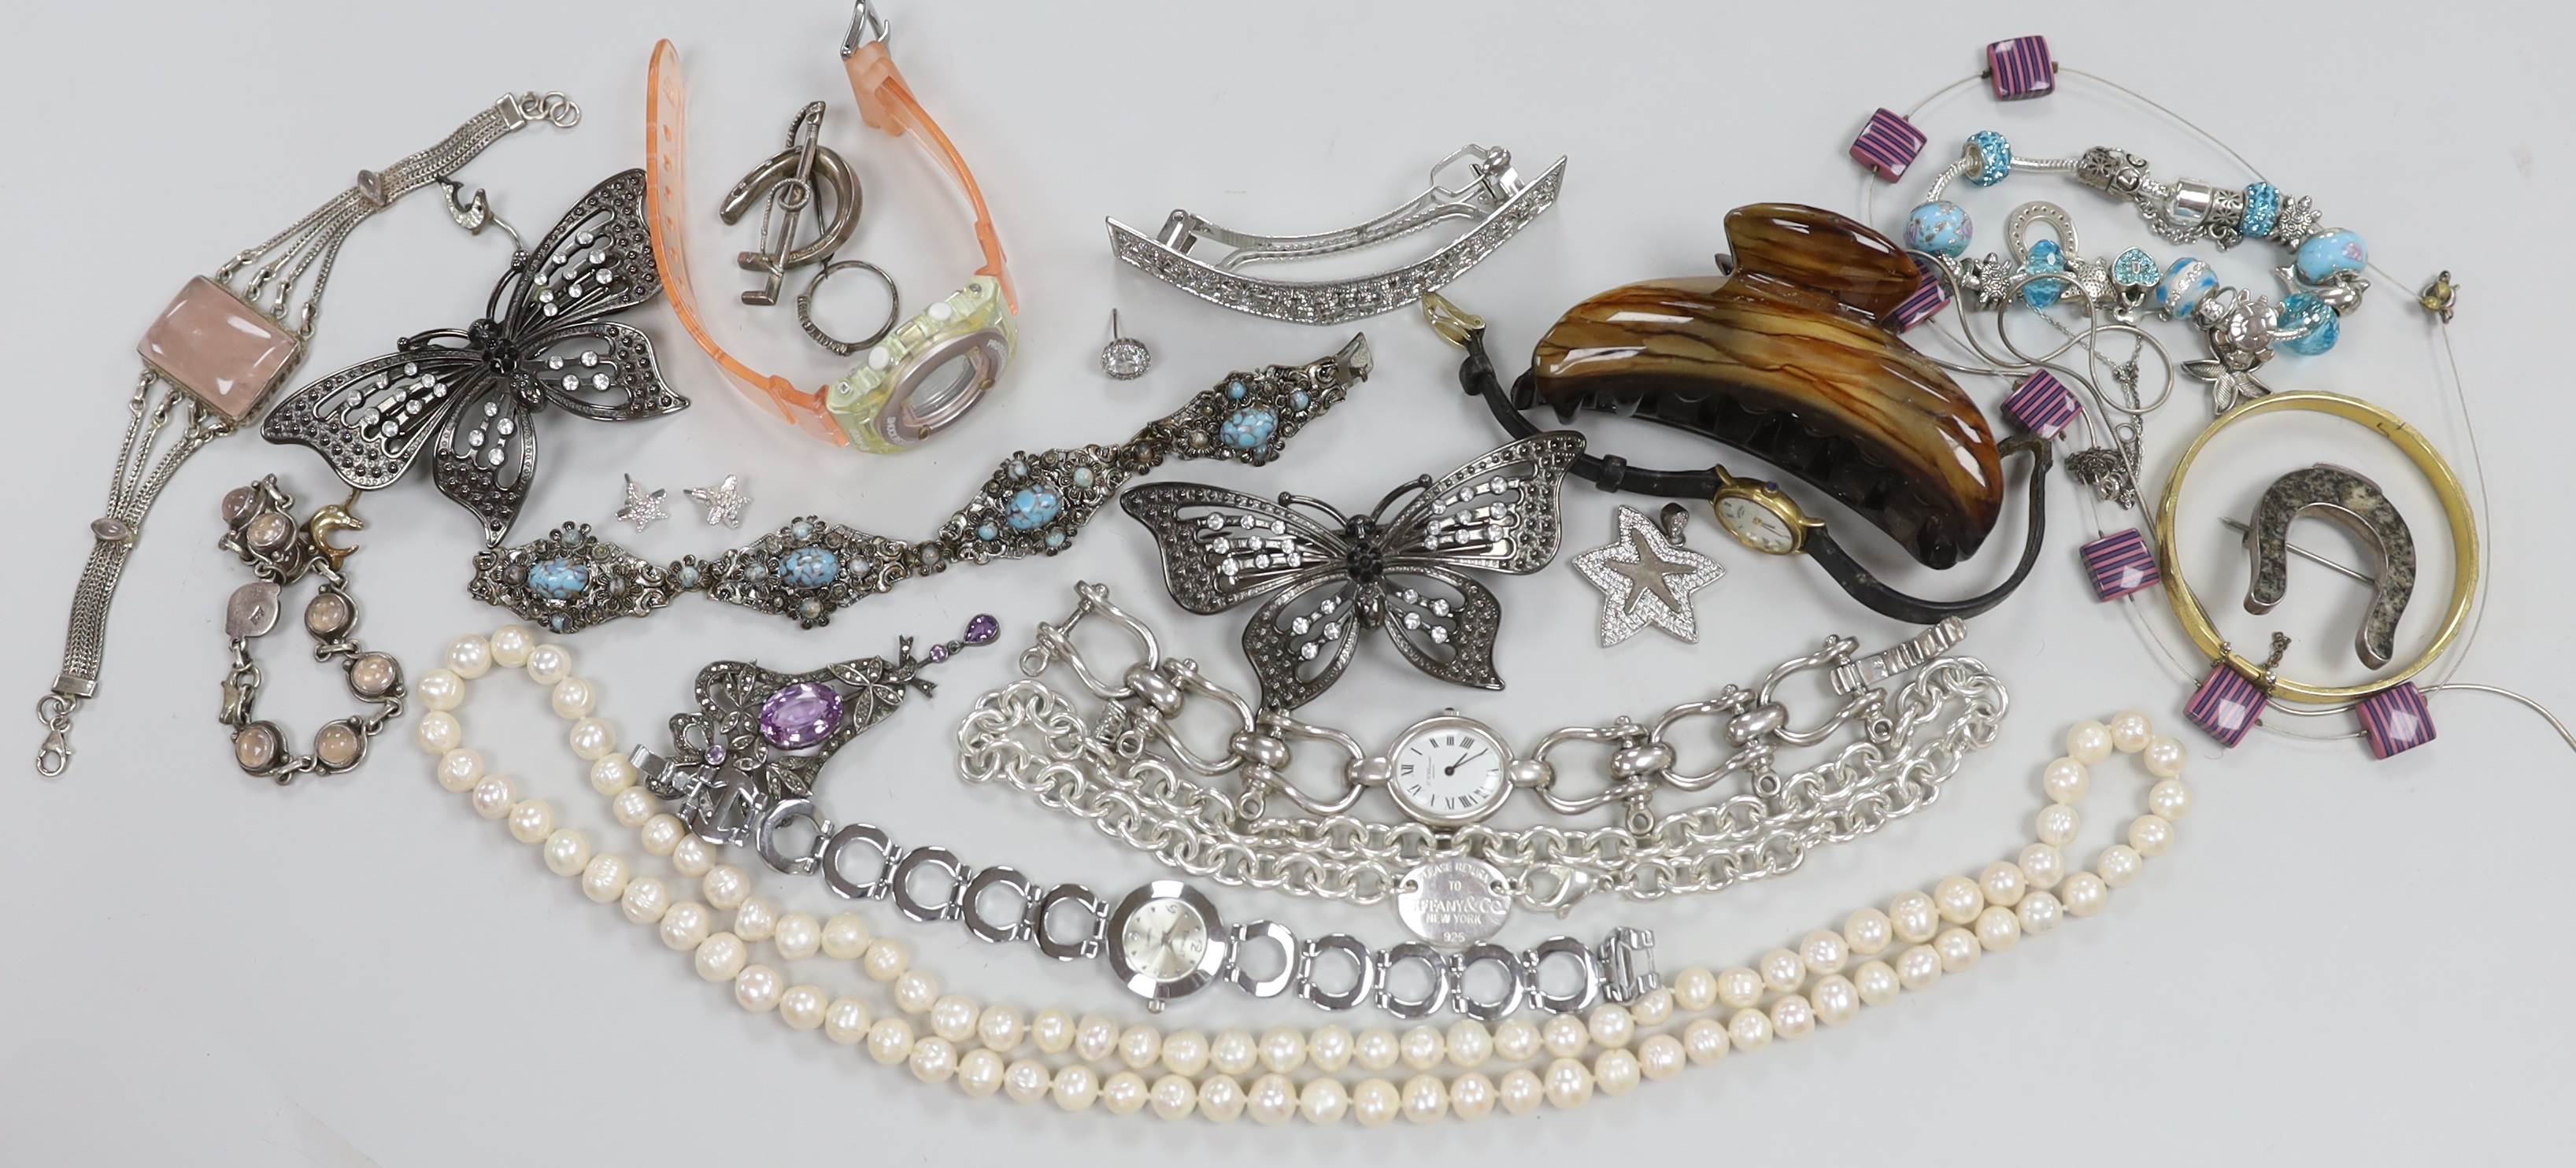 Four assorted 9ct gold and gem set rings, gross weight 6.3 grams, a 925 and rose quartz bracelet, a silver bracelet watch, a silver horseshoe and riding crop brooch and other jewellery including costume.